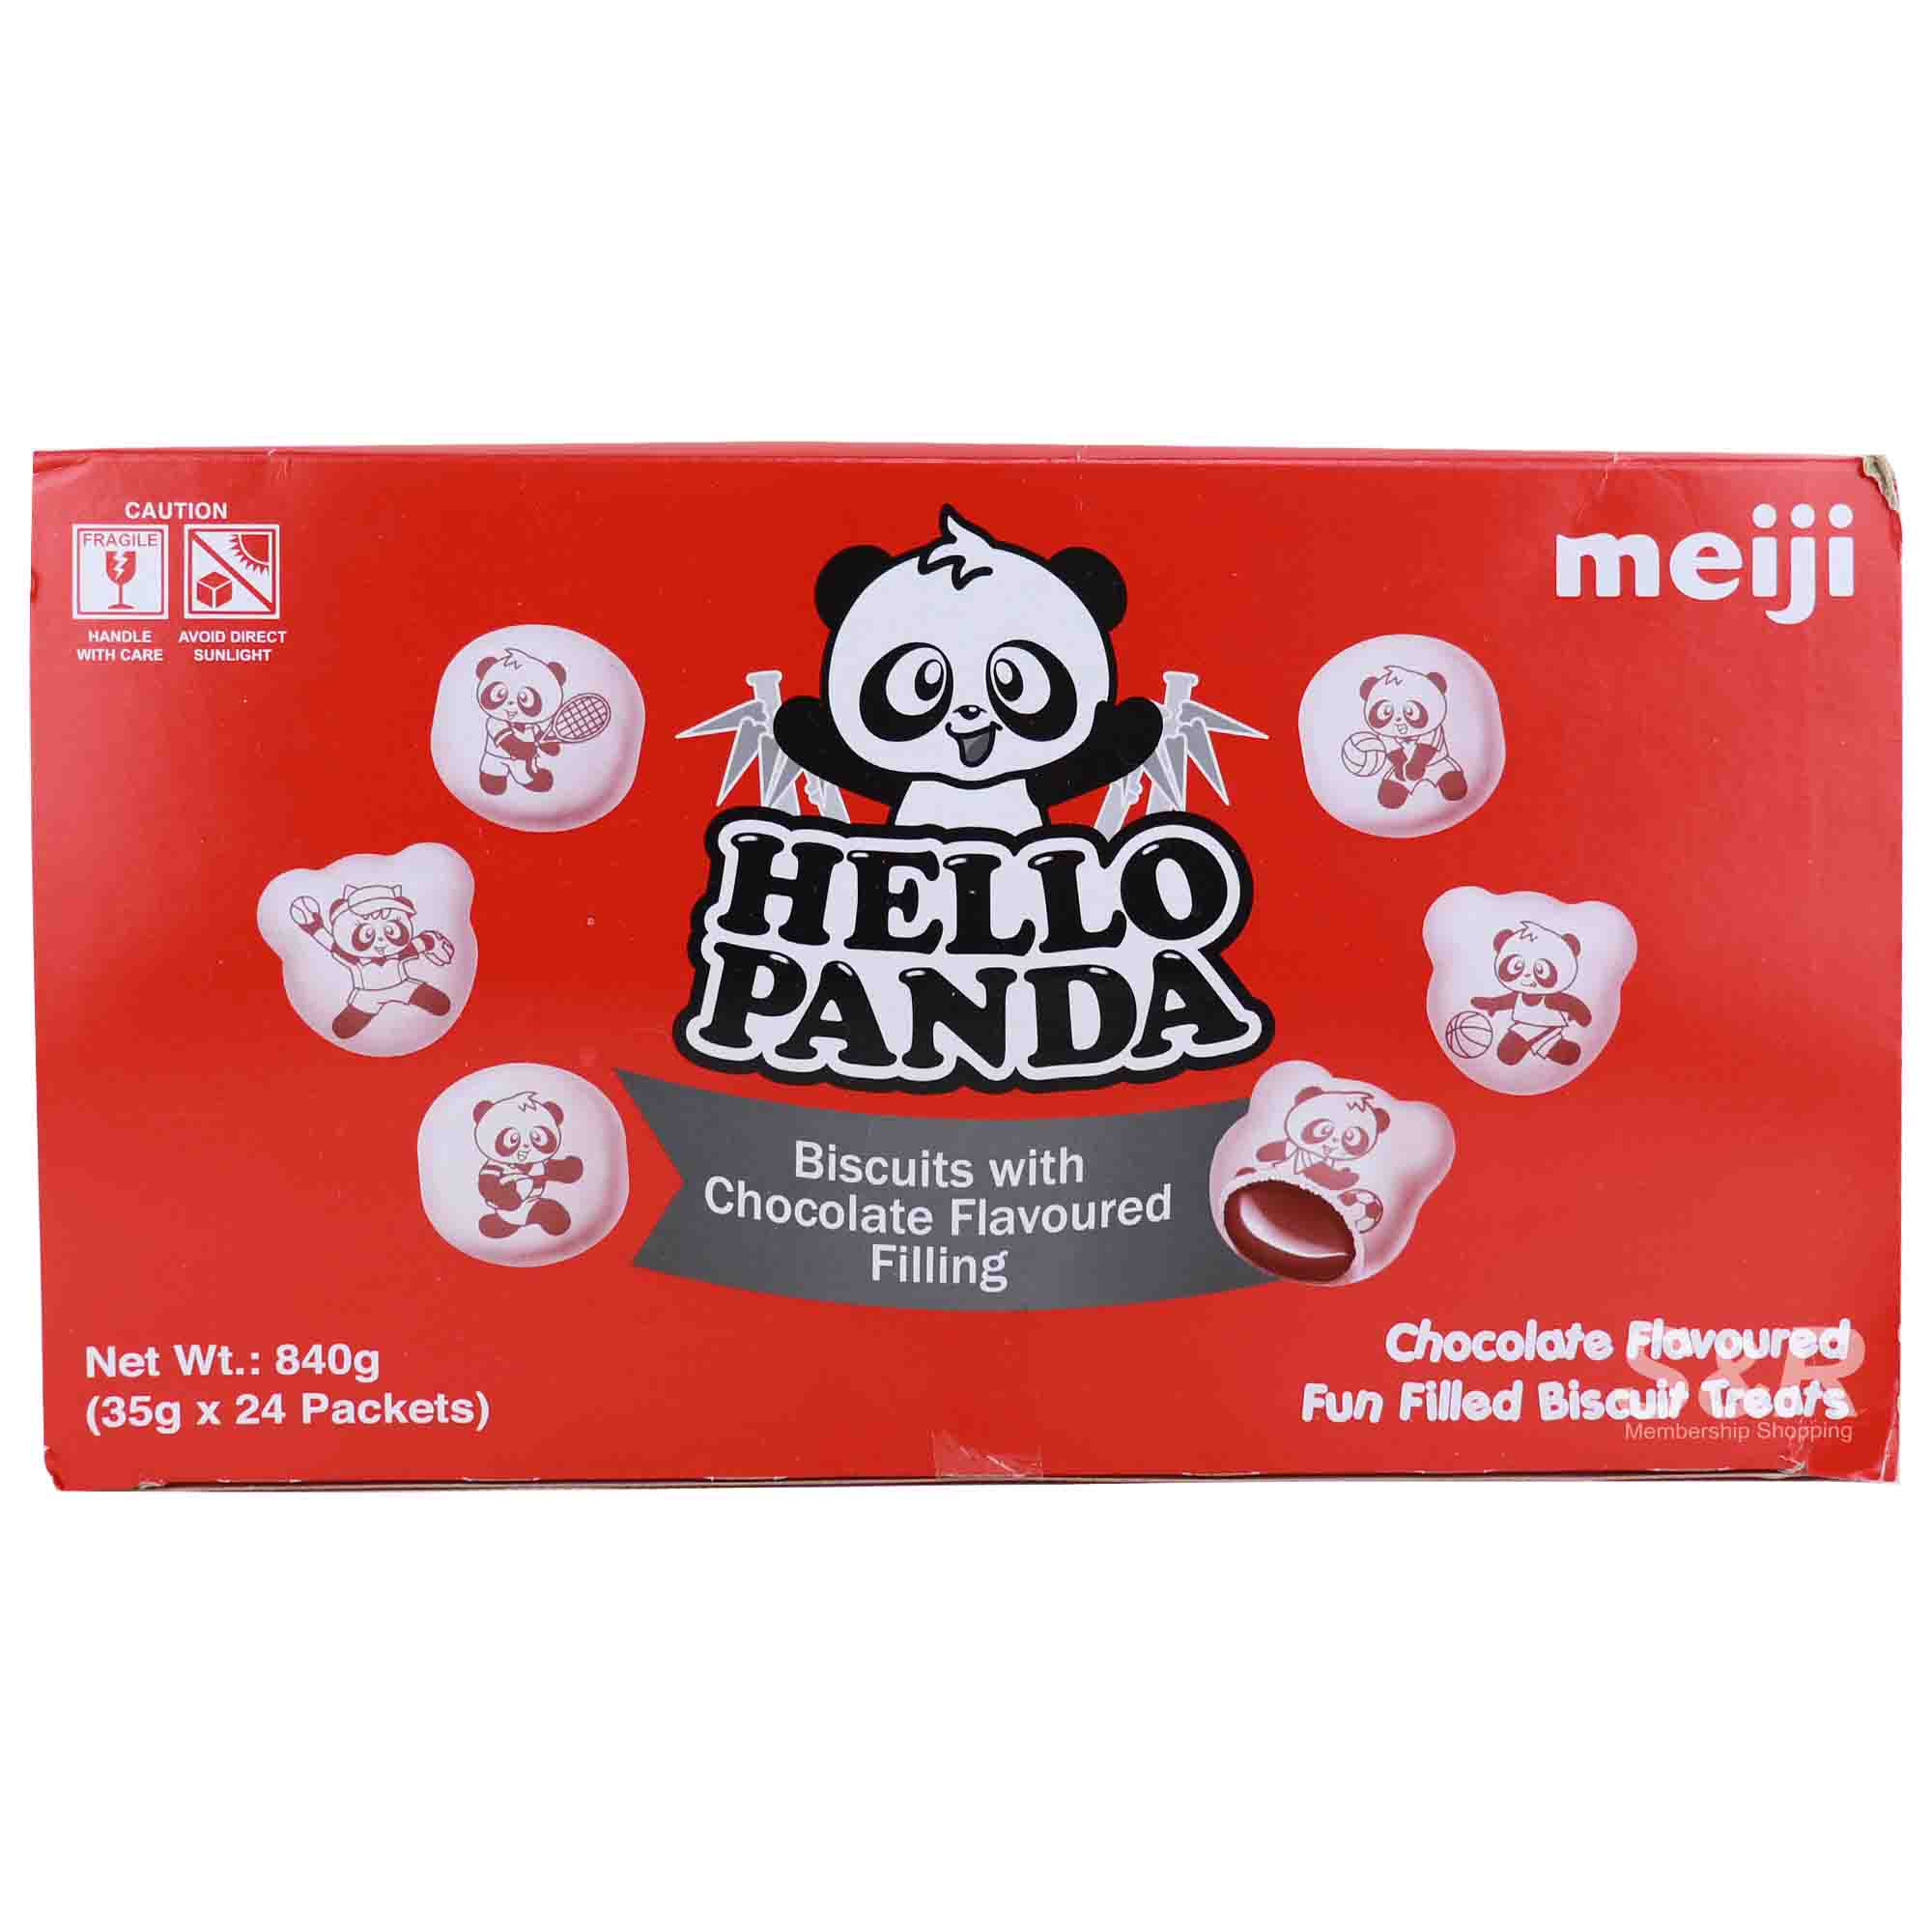 Meiji Hello Panda Biscuits with Chocolate Flavored Filling 840g